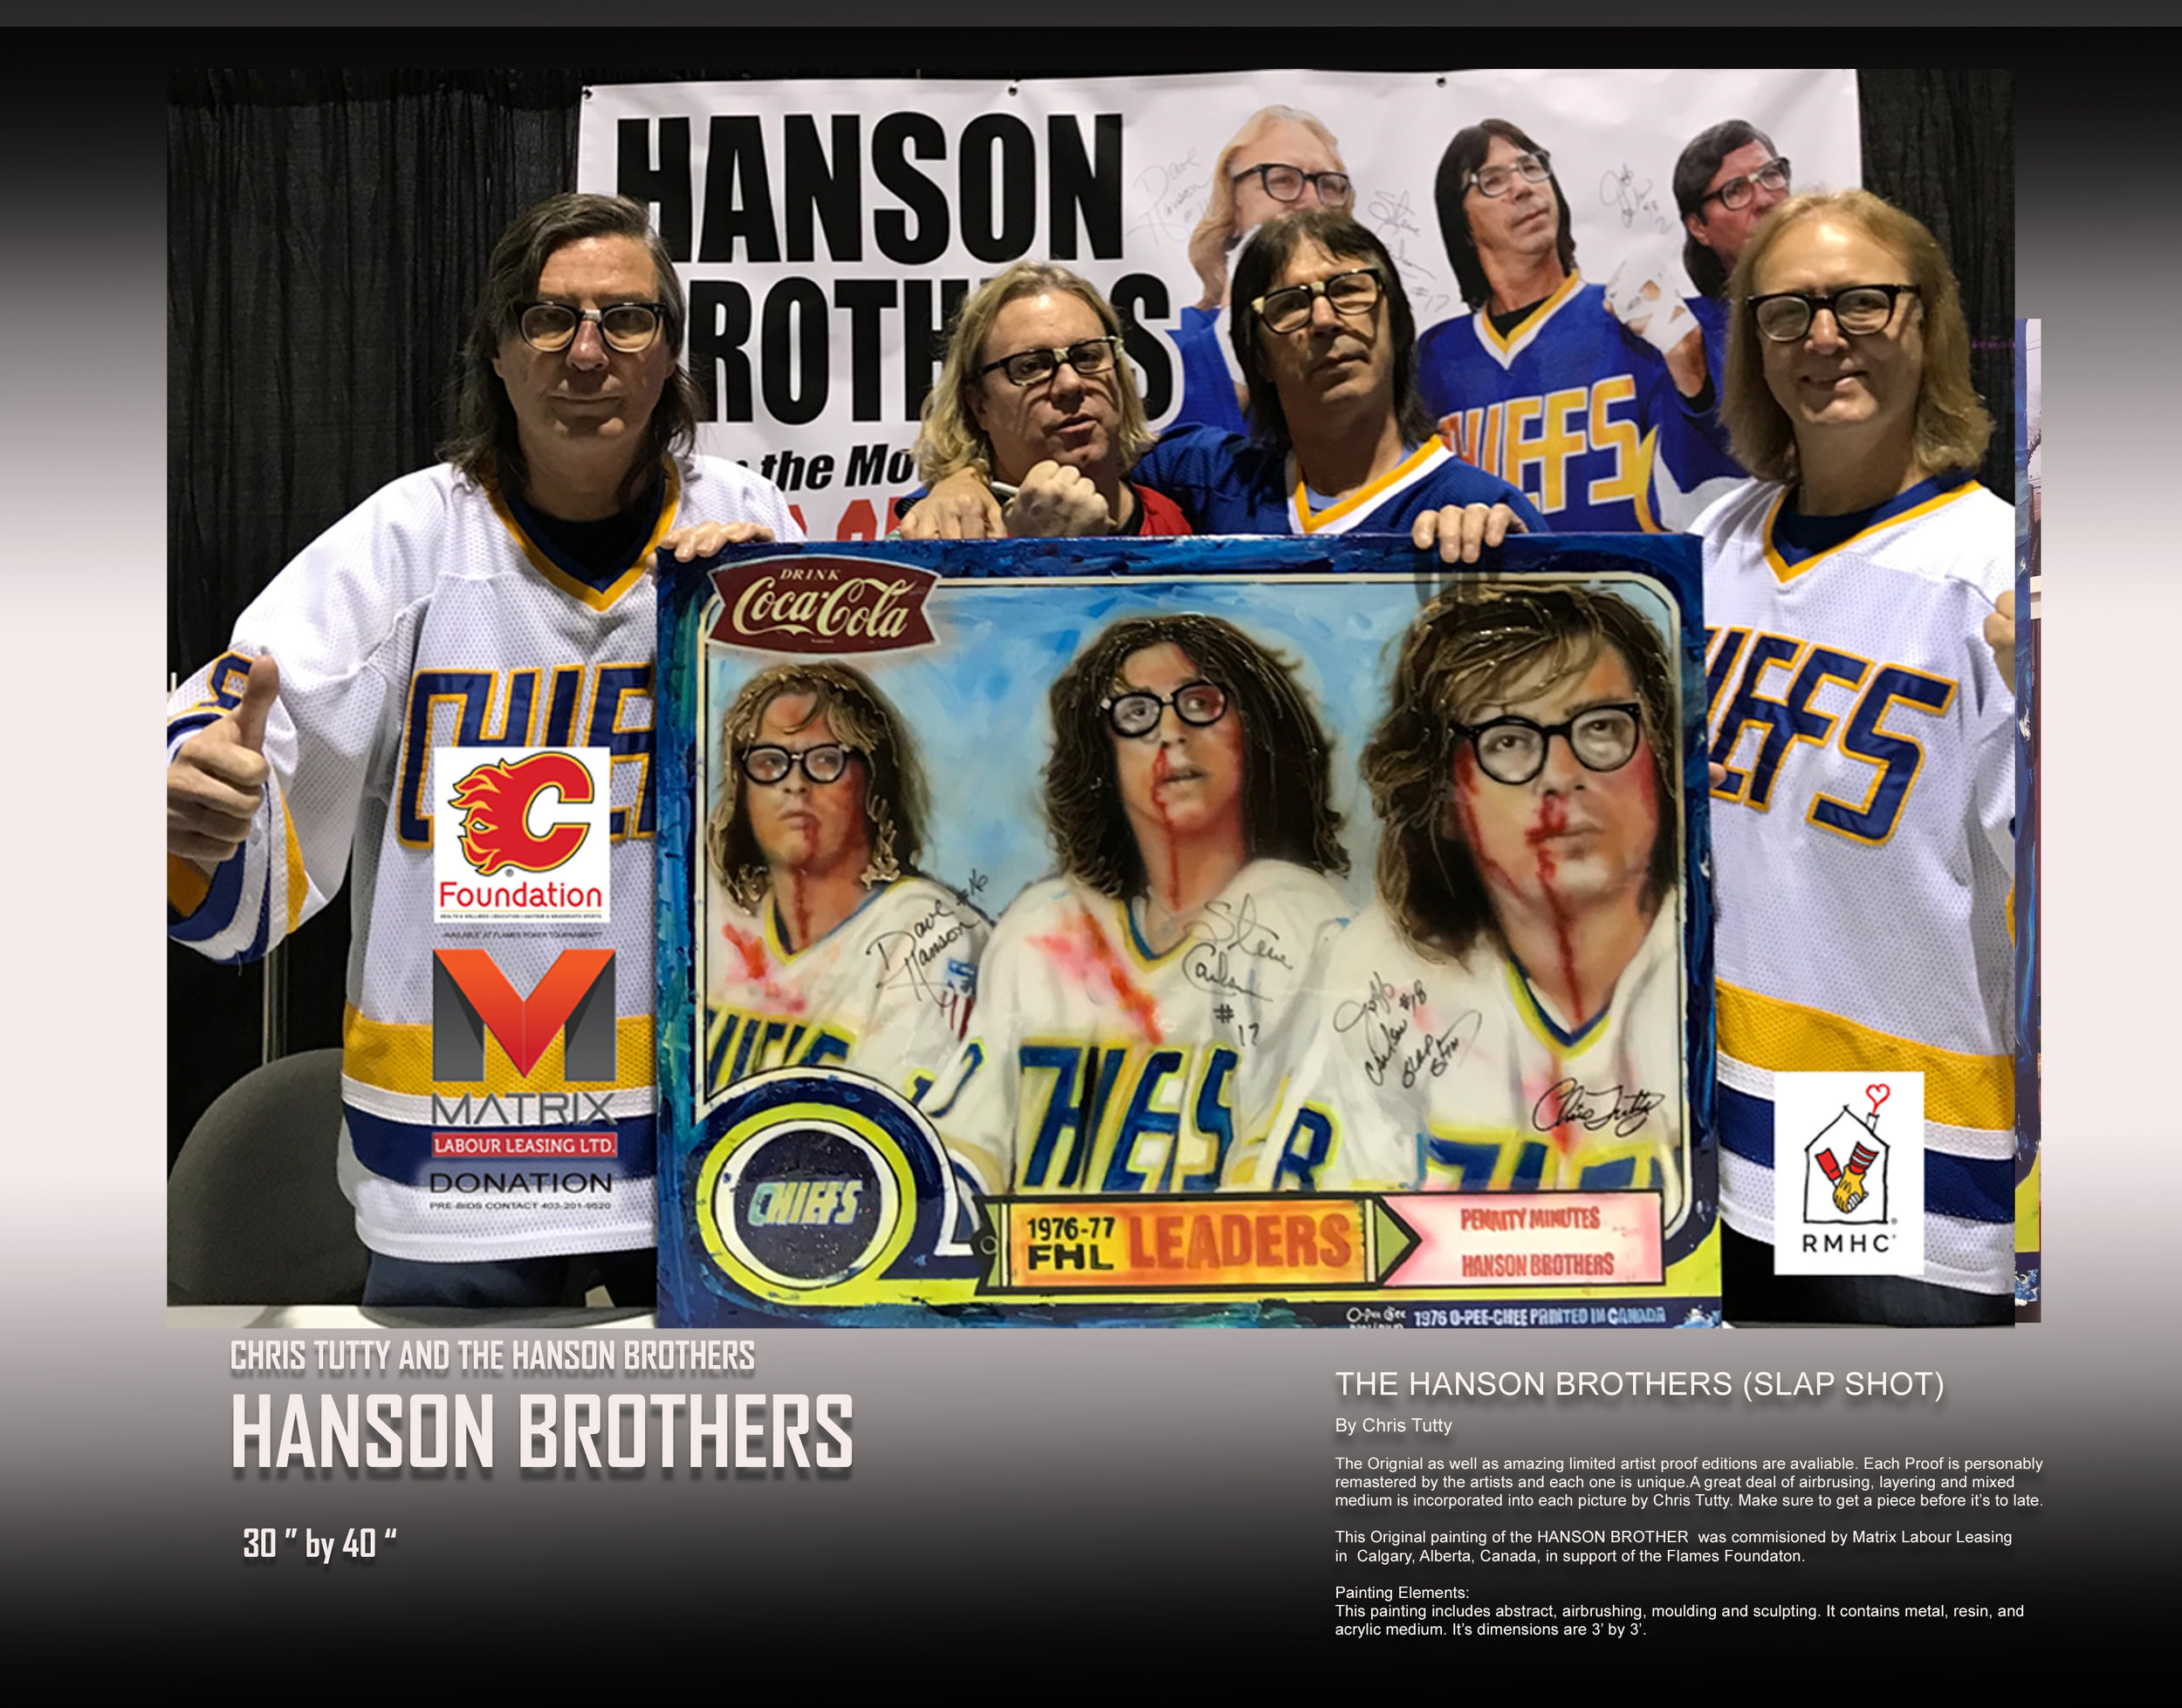 Hanson brothers Celebrity signed art by Chris Tutty